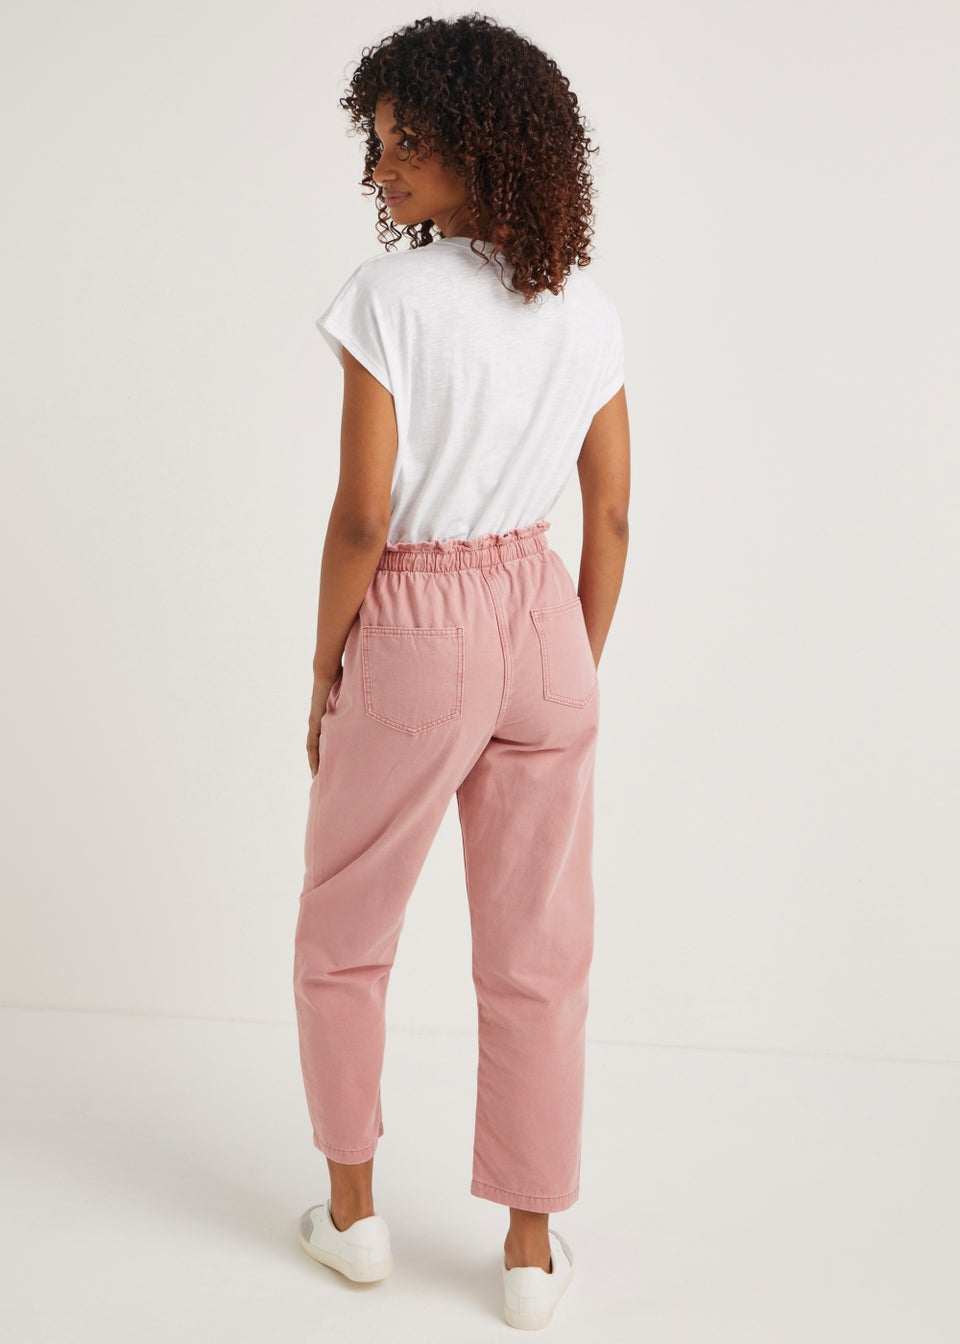 Buy Pink Trousers  Pants for Women by FREEHAND Online  Ajiocom